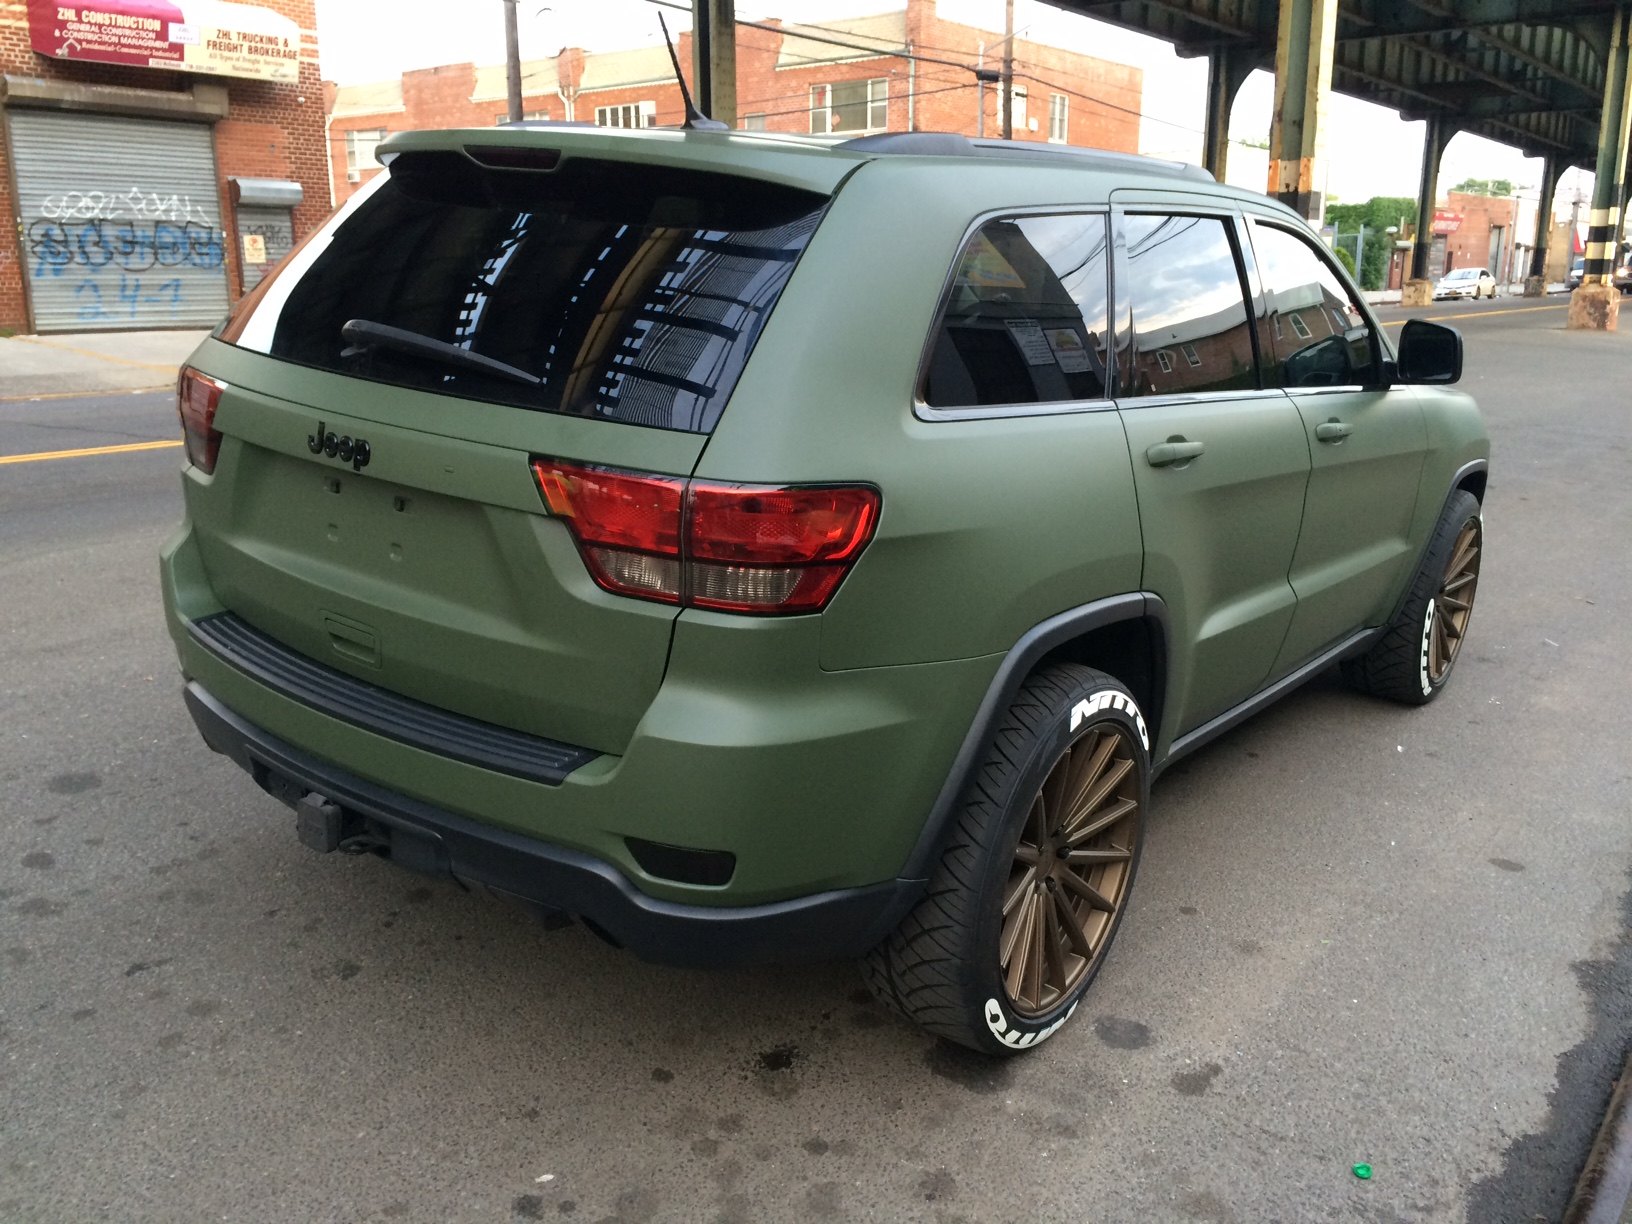 Roofline Spoiler on Green Matte Jeep Grand Cherokee - Photo by ONEighty NYC